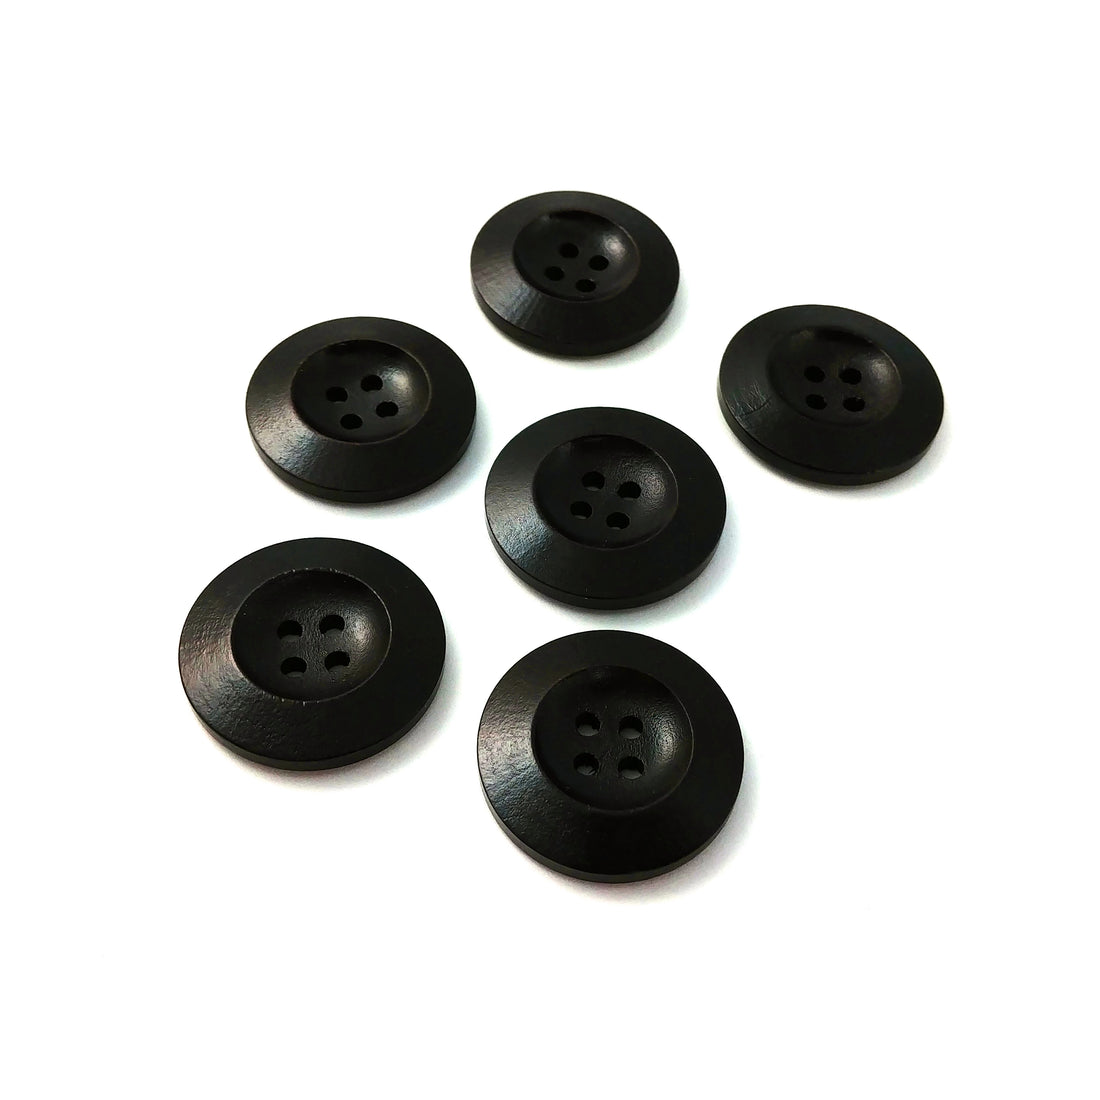 Dark brown Wooden Sewing Buttons 25mm - set of 6 natural wood button